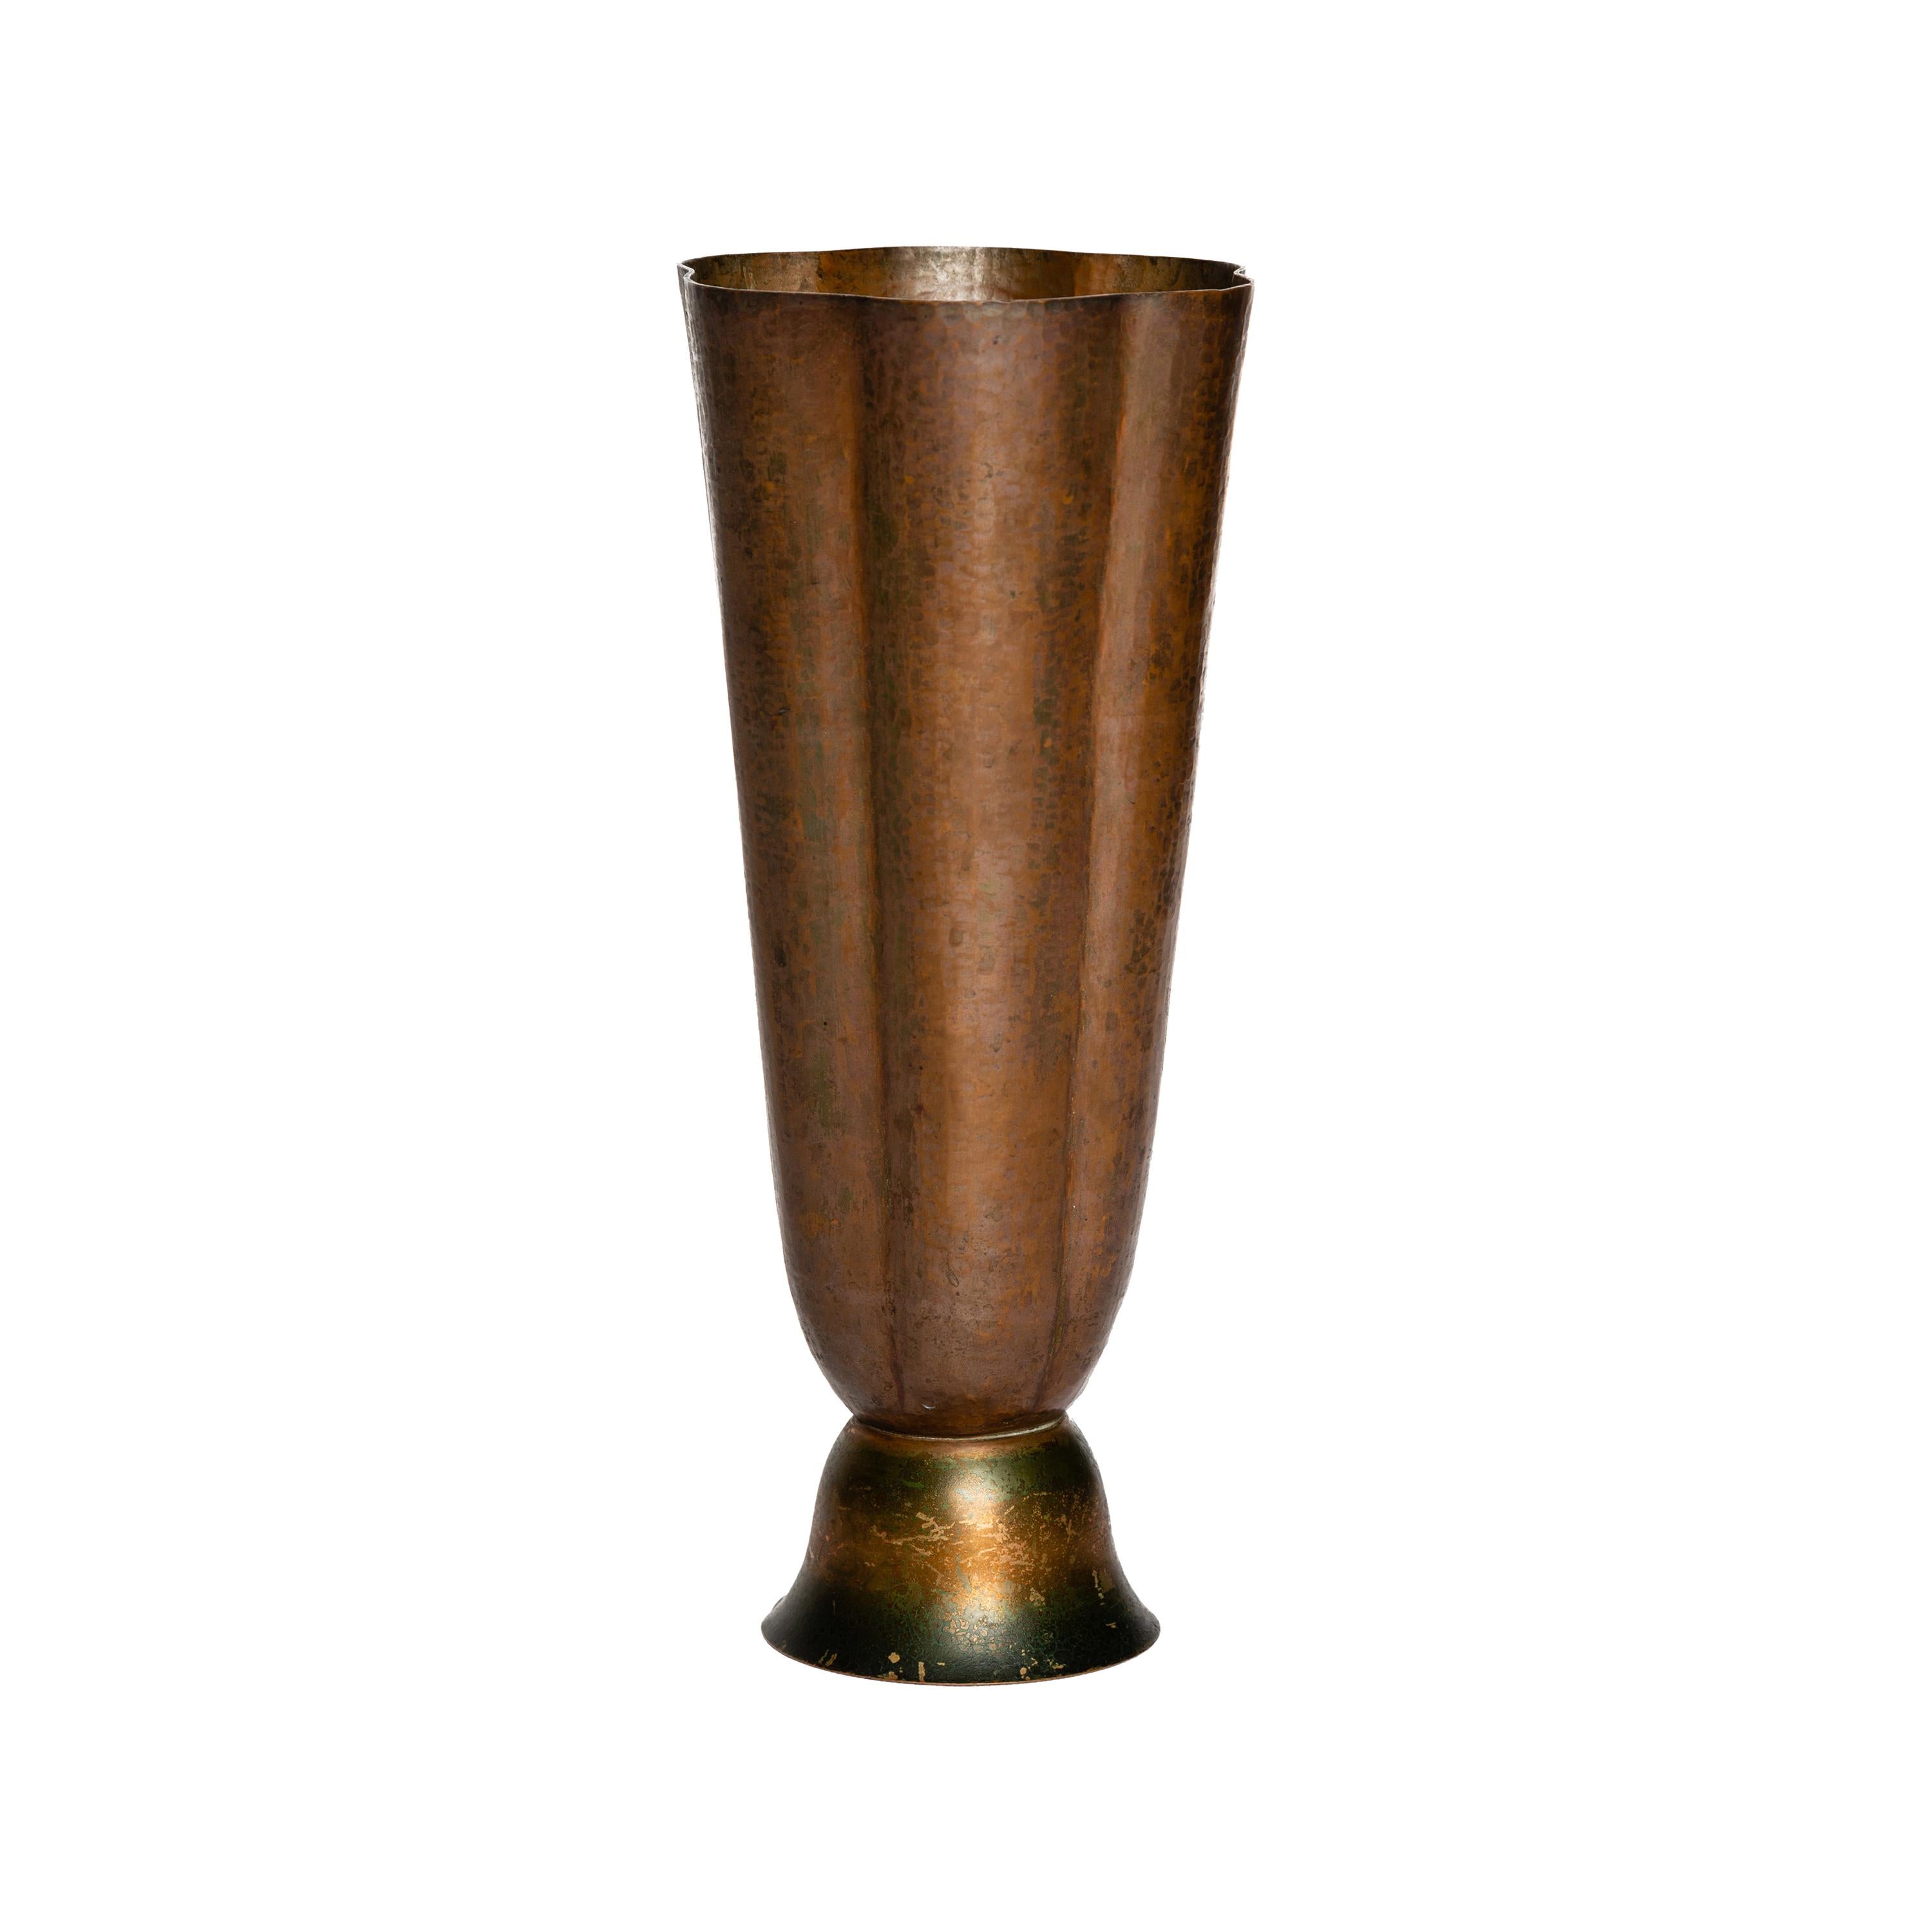 Vintage Hammered Copper Vase, Angelo Molignoni, Early 20th century